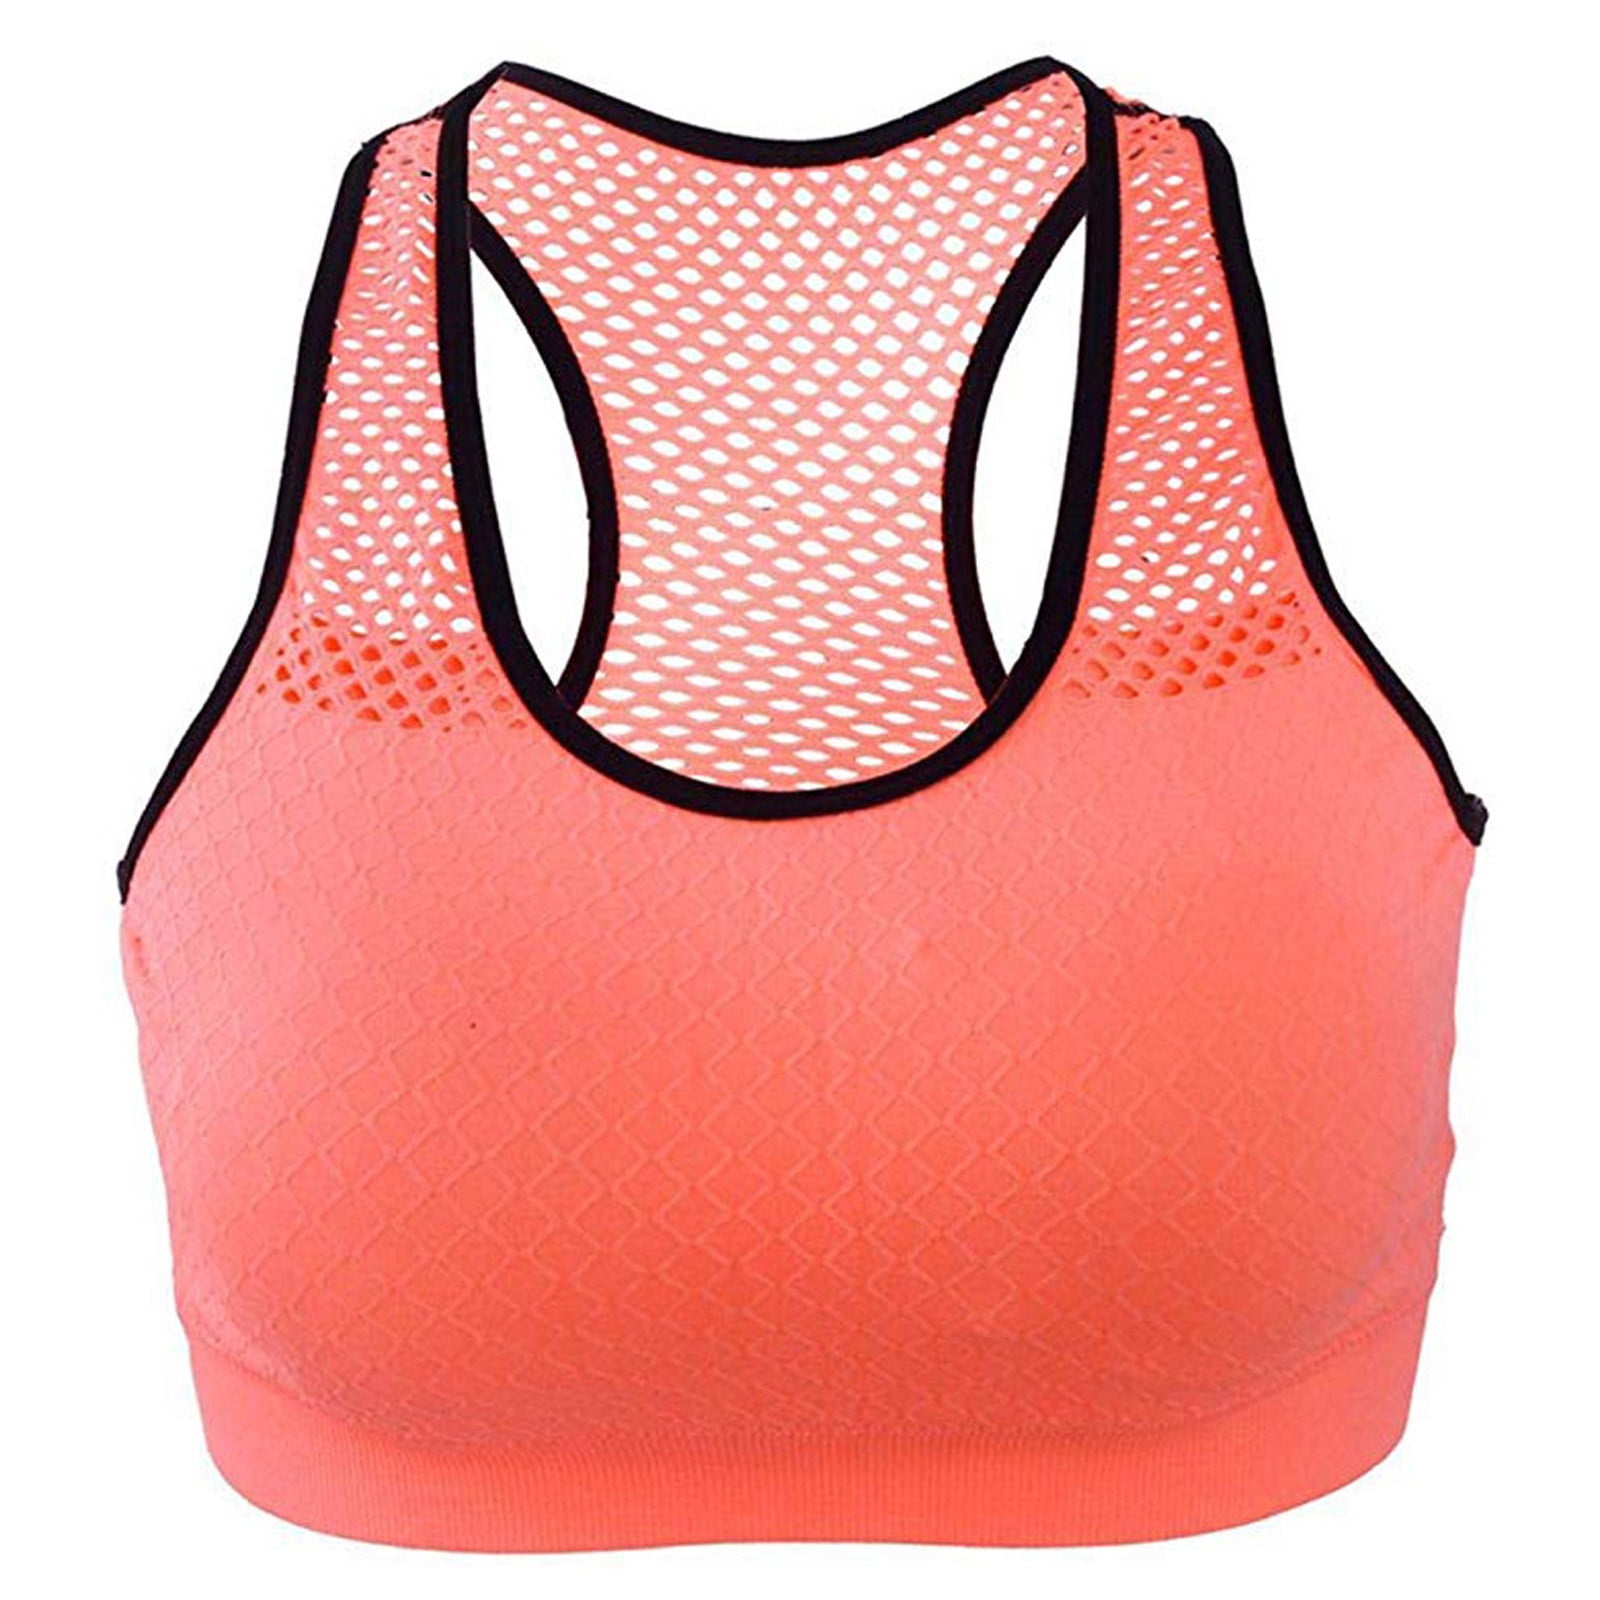 Penkiiy Sports Bras for Women Women's Ruched Sports Bras Padded